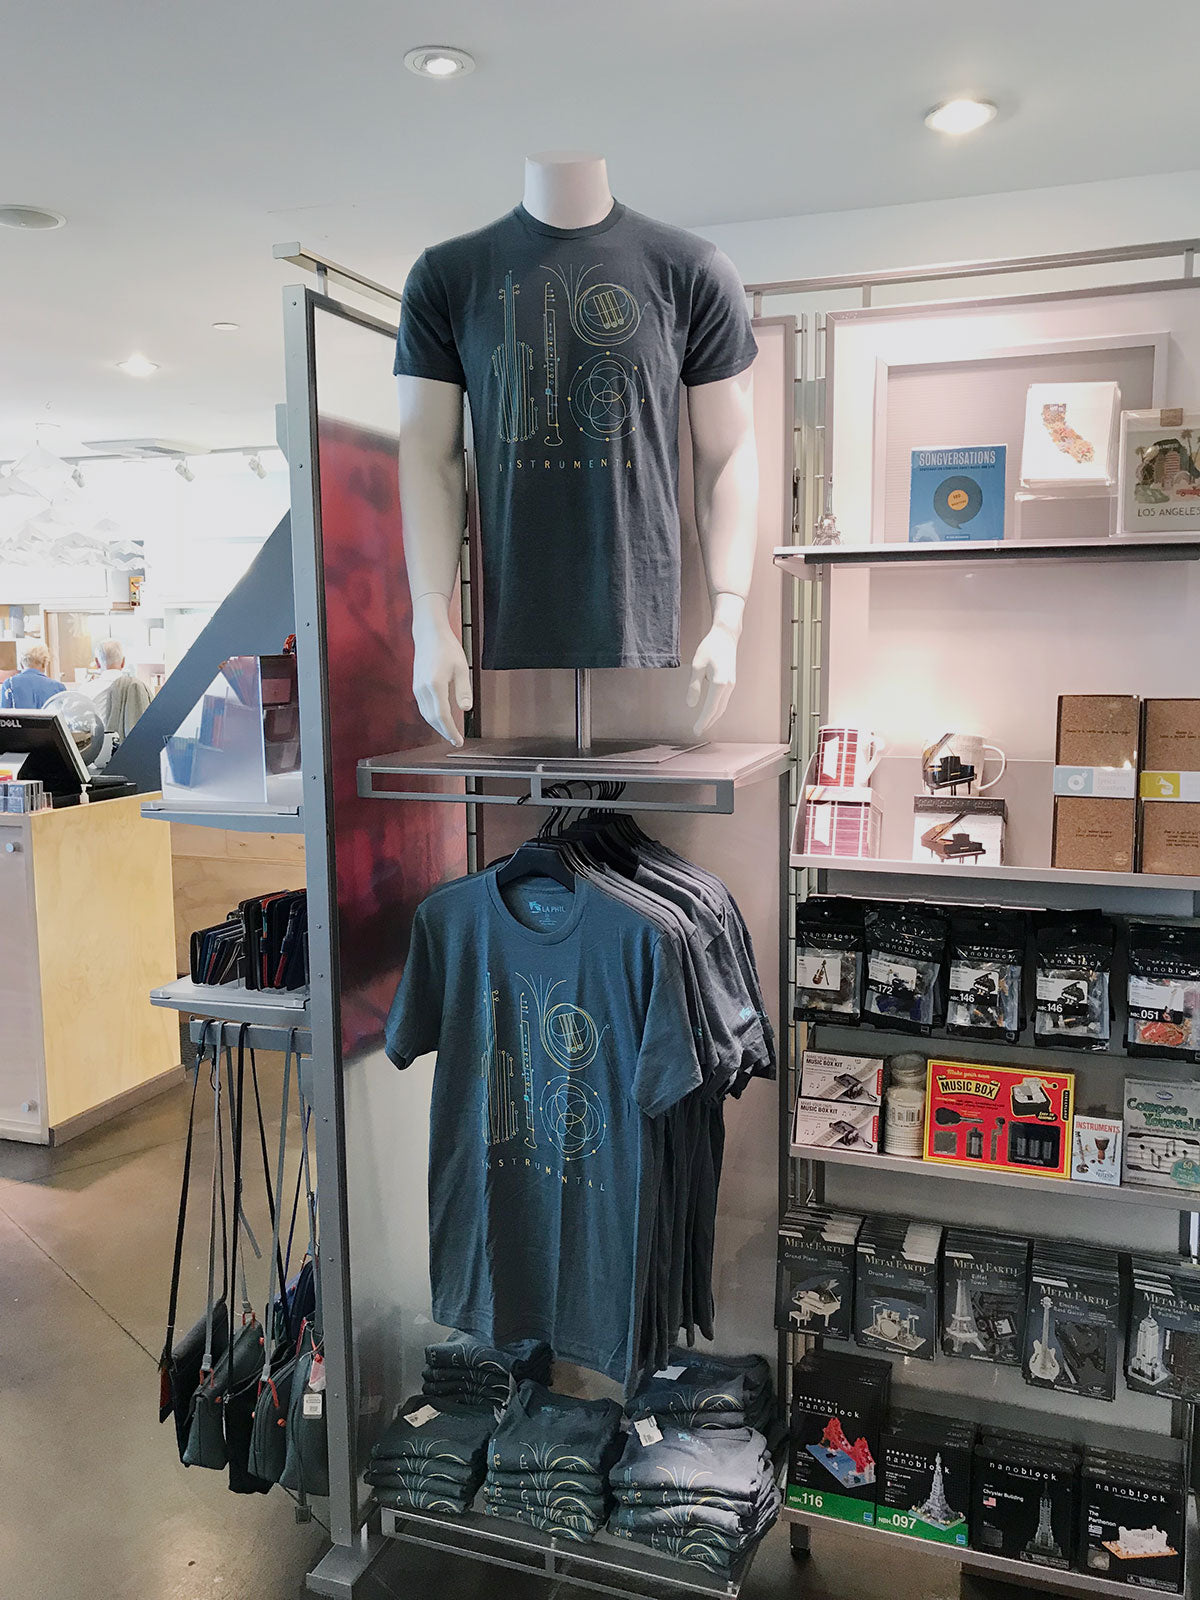 LA Phil t-shirts displayed in store